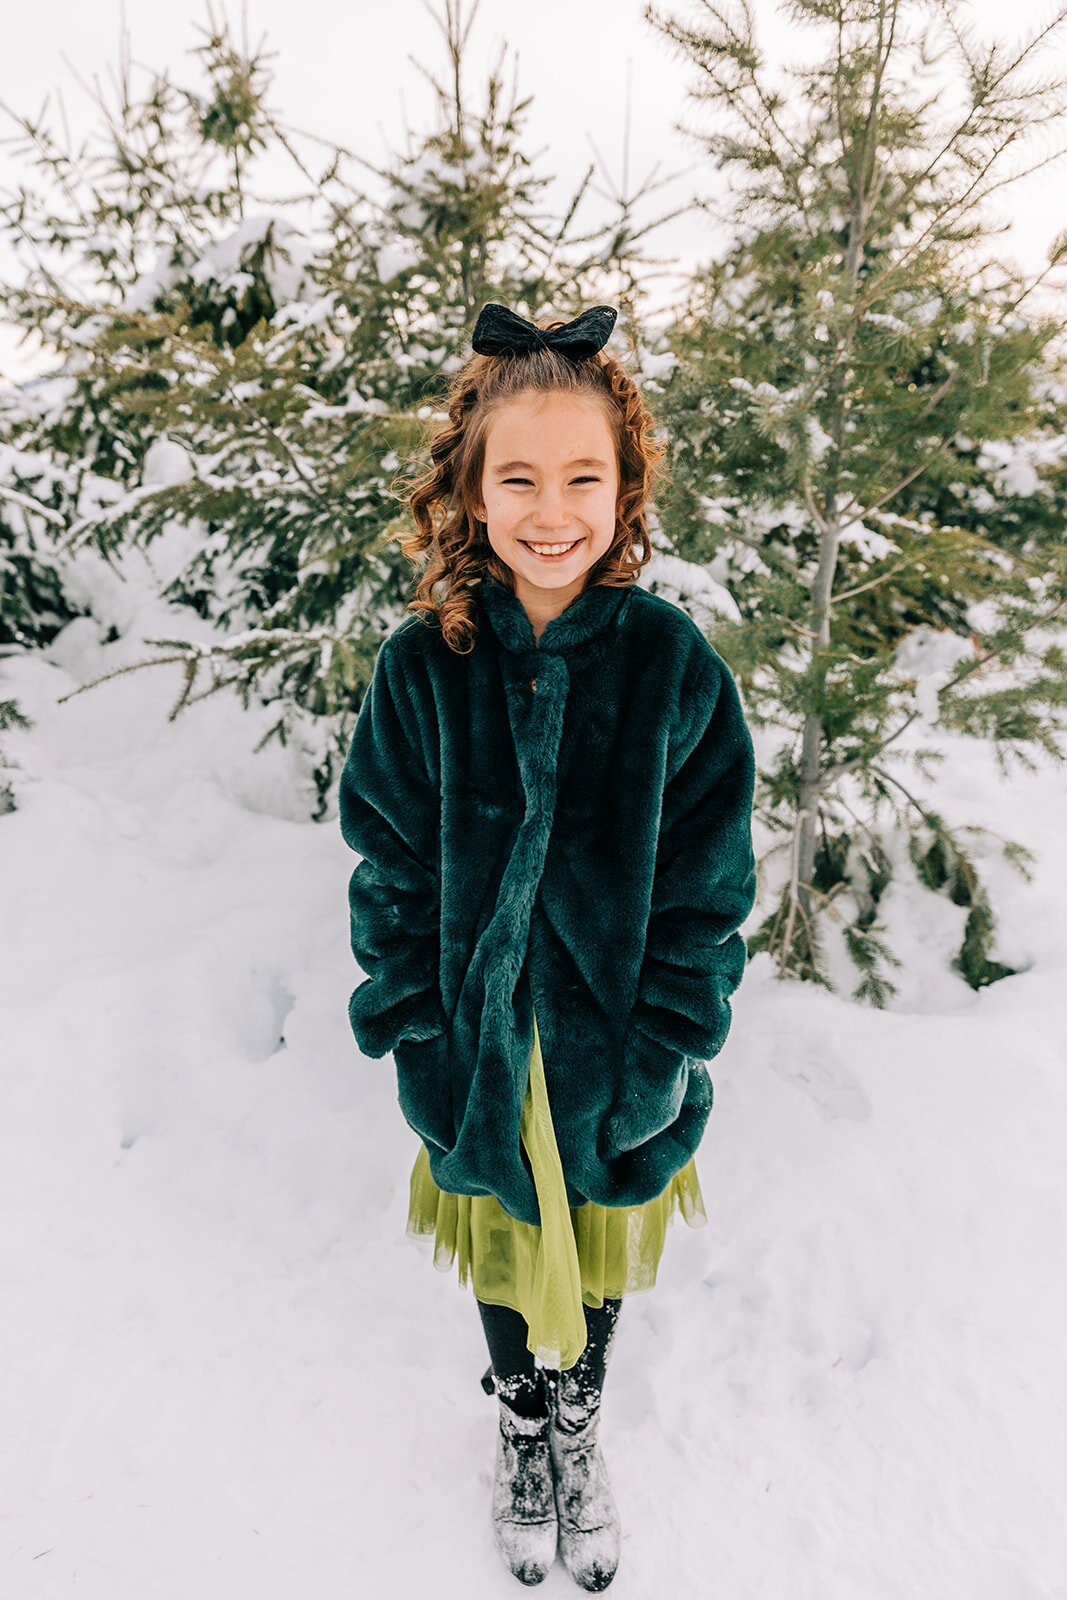  fuzzy teal coat green tulle dress curled ponytail hairstyles winter fashion family pictures daughters family picture styling inspiration family pose ideas winter photoshoot snowy pictures adams acres tree farm family photographers in utah profession